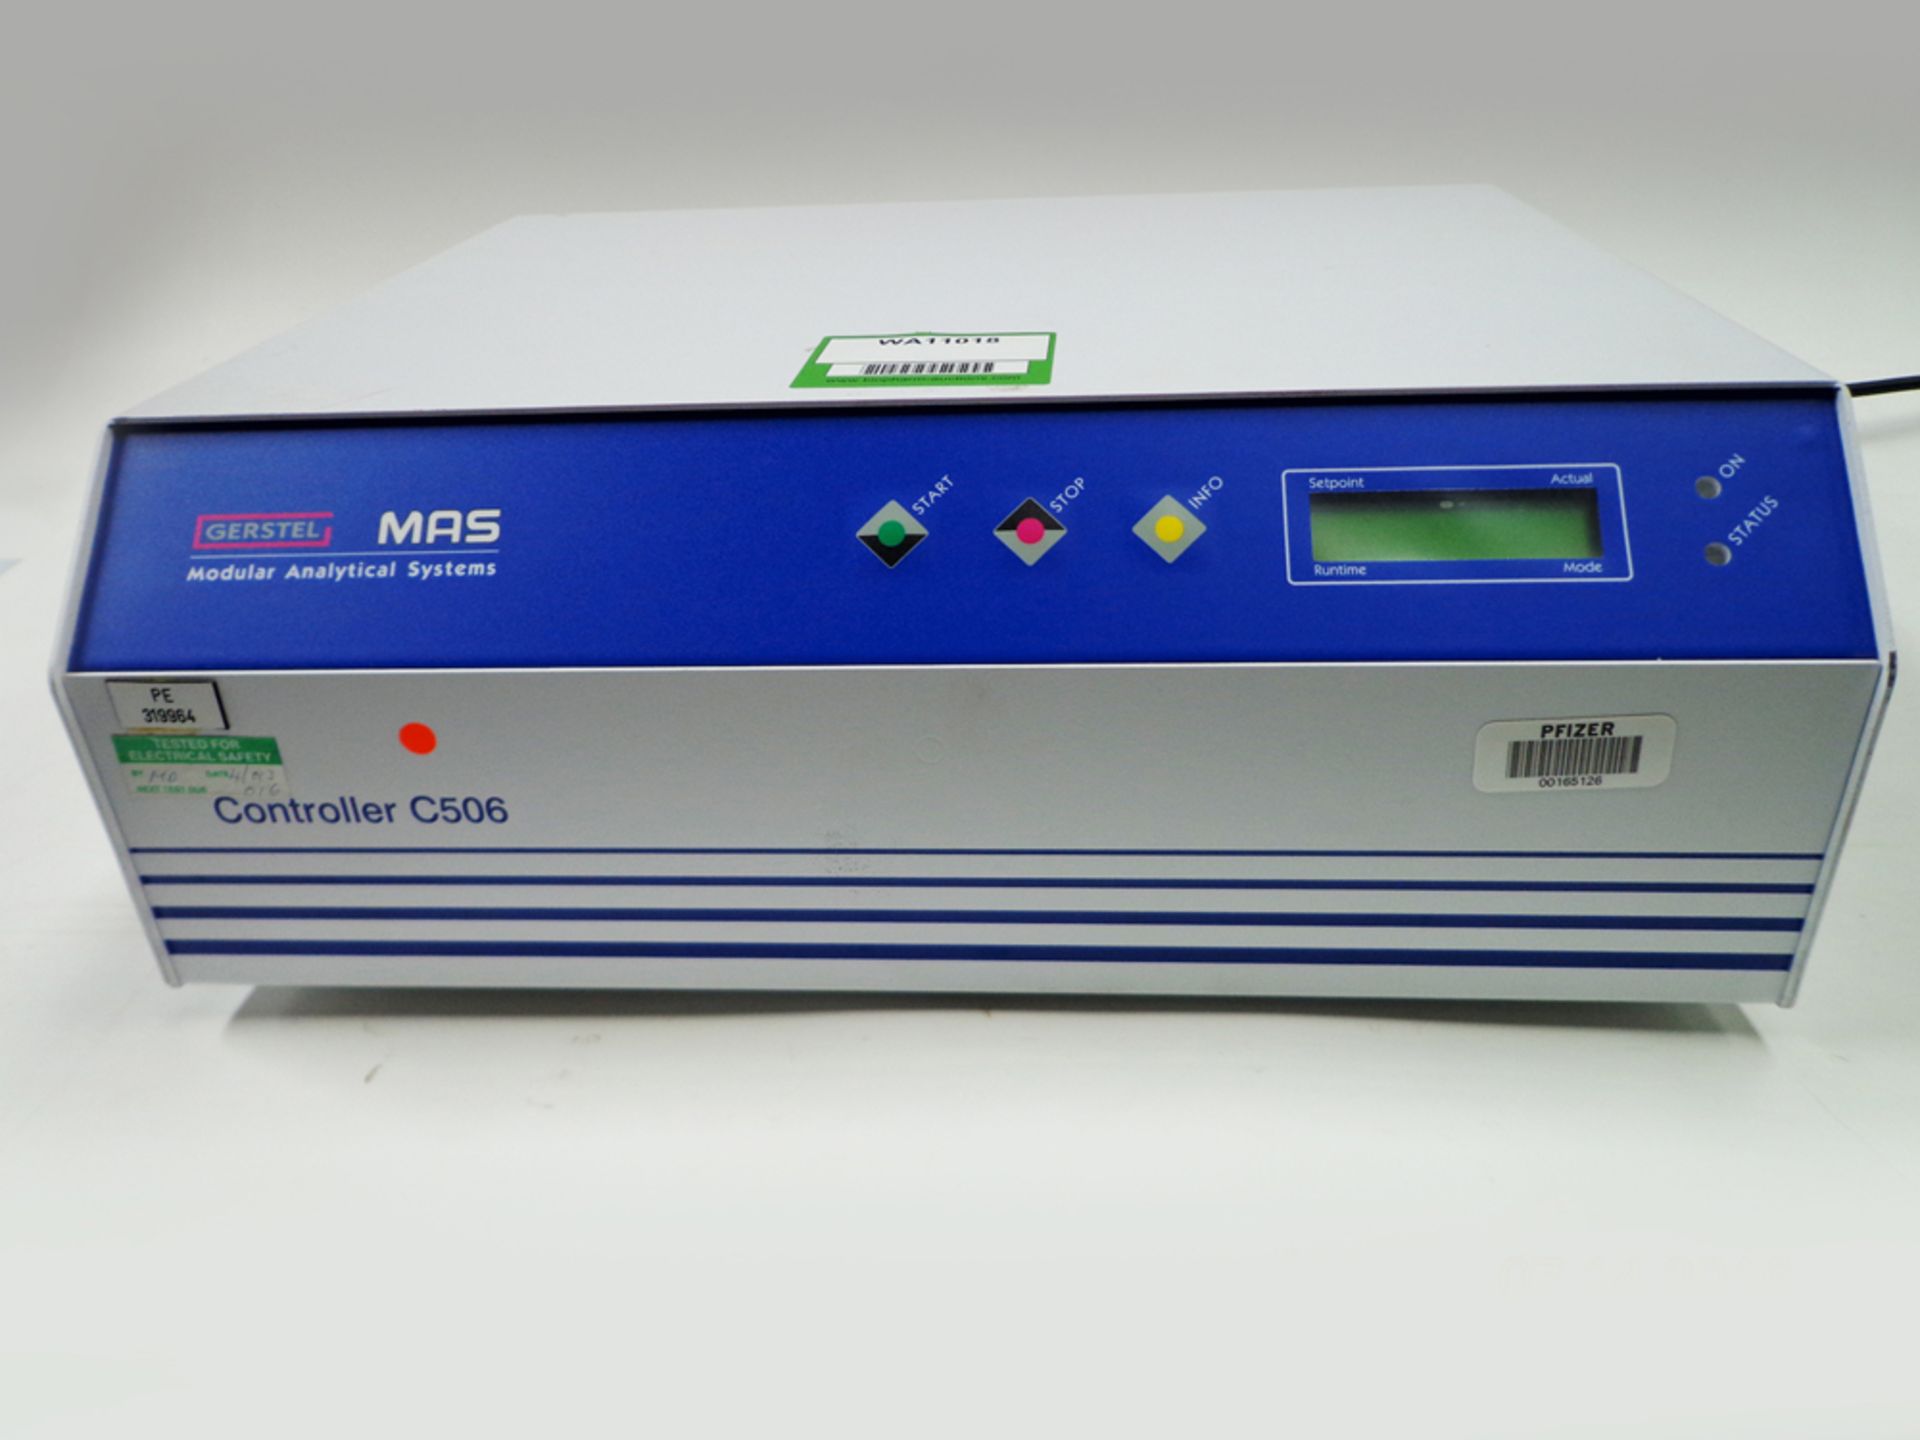 Gerstel MAS C506 Modular Analytical Systems Controller, serial number 07410-01105 (Ref: WA11018)